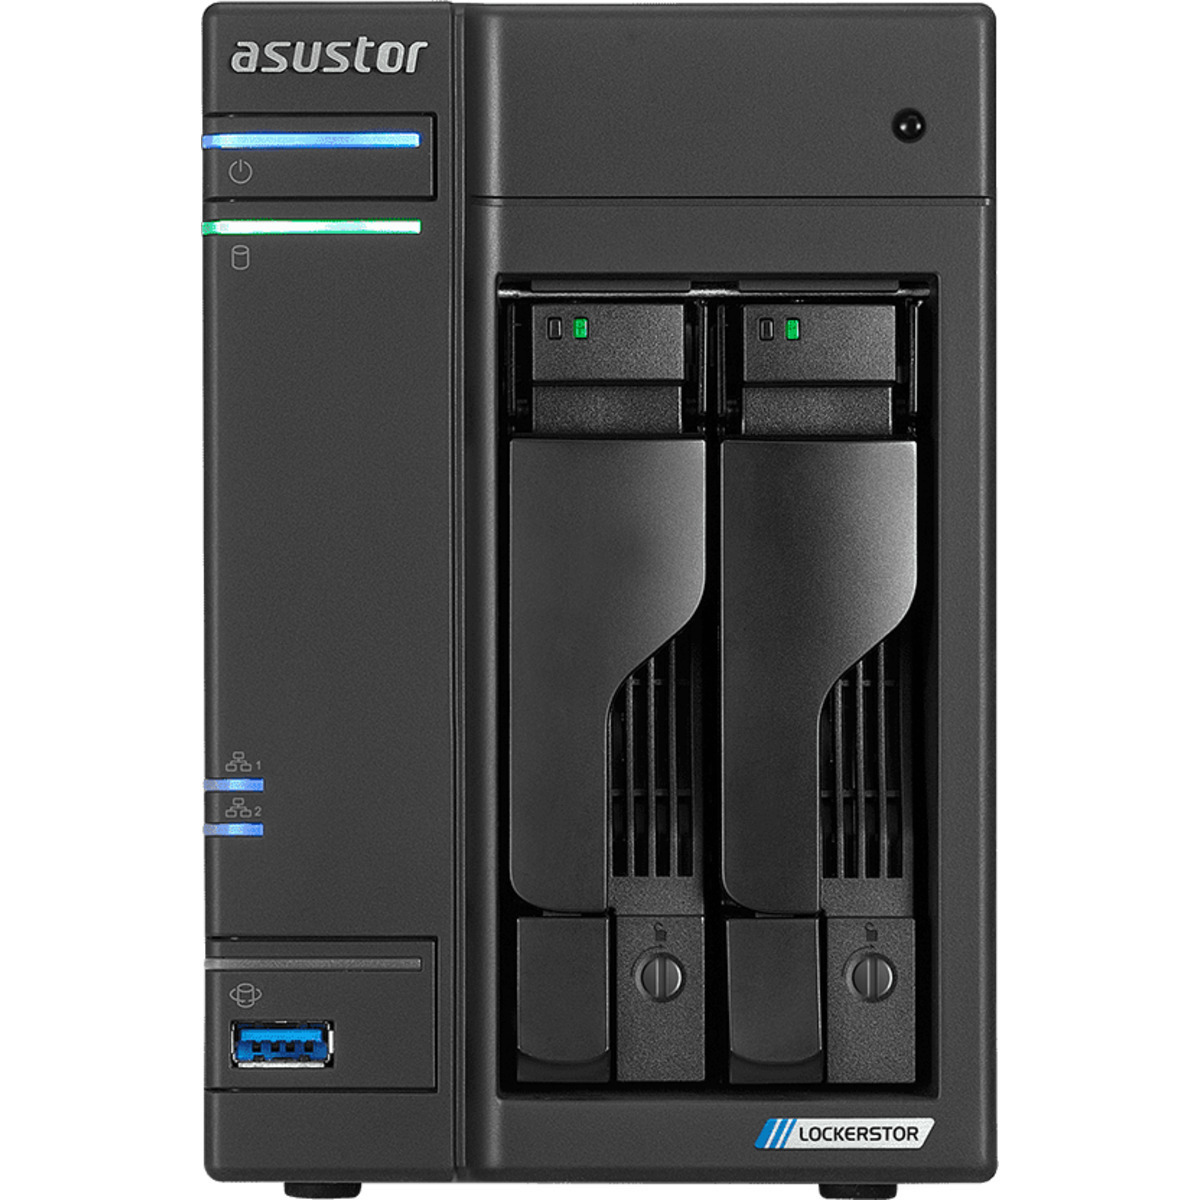 buy $974 ASUSTOR AS6602T Lockerstor 2 2tb Desktop NAS - Network Attached Storage Device 2x1000gb Seagate IronWolf 125 ZA1000NM10002 2.5 SATA 6Gb/s SSD NAS Class Drives Installed - Burn-In Tested - FREE RAM UPGRADE - nas headquarters buy network attached storage server device das new raid-5 free shipping usa AS6602T Lockerstor 2